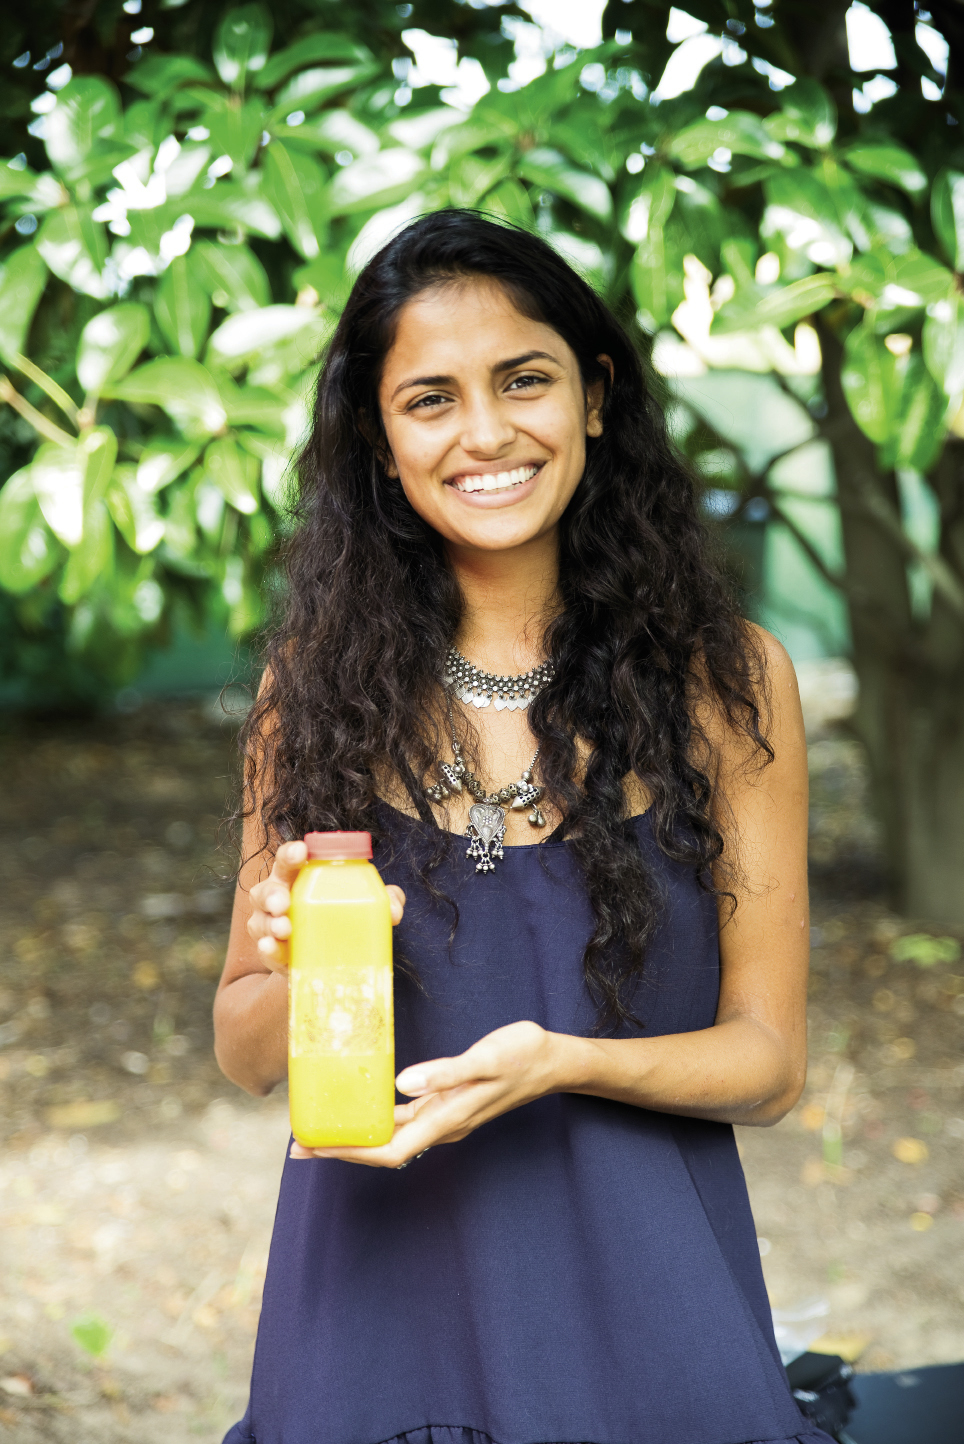 Ruchi Mistry of Huriyali Juices shows off a bottle of her company’s cold-pressed juice made daily